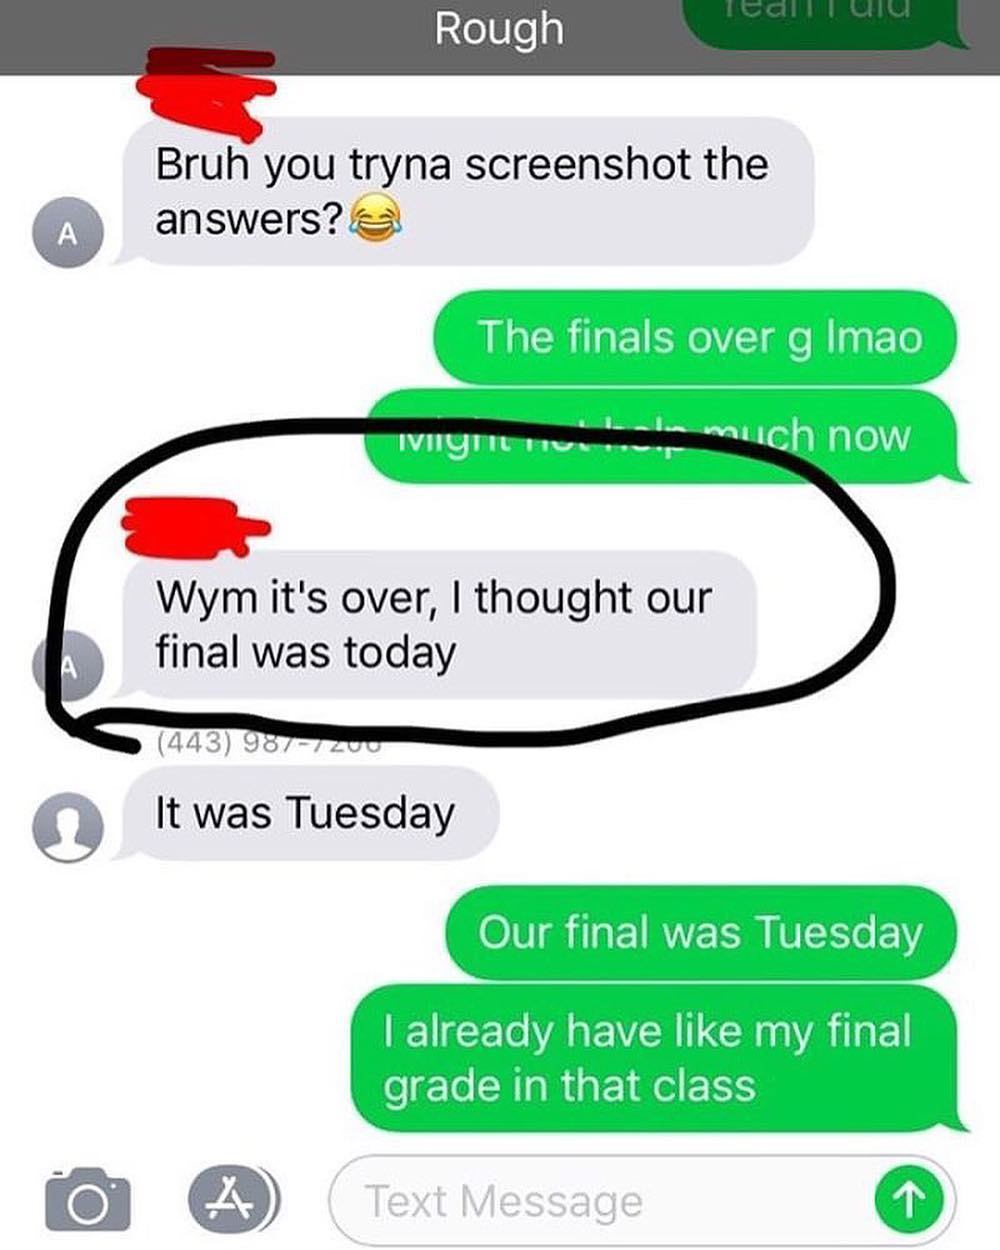 friend text messages love - Tedl uu Rough Bruh you tryna screenshot the answers? The finals over g Imao Ivym much now Wym it's over, I thought our final was today 443 987120 It was Tuesday Our final was Tuesday I already have my final grade in that class 